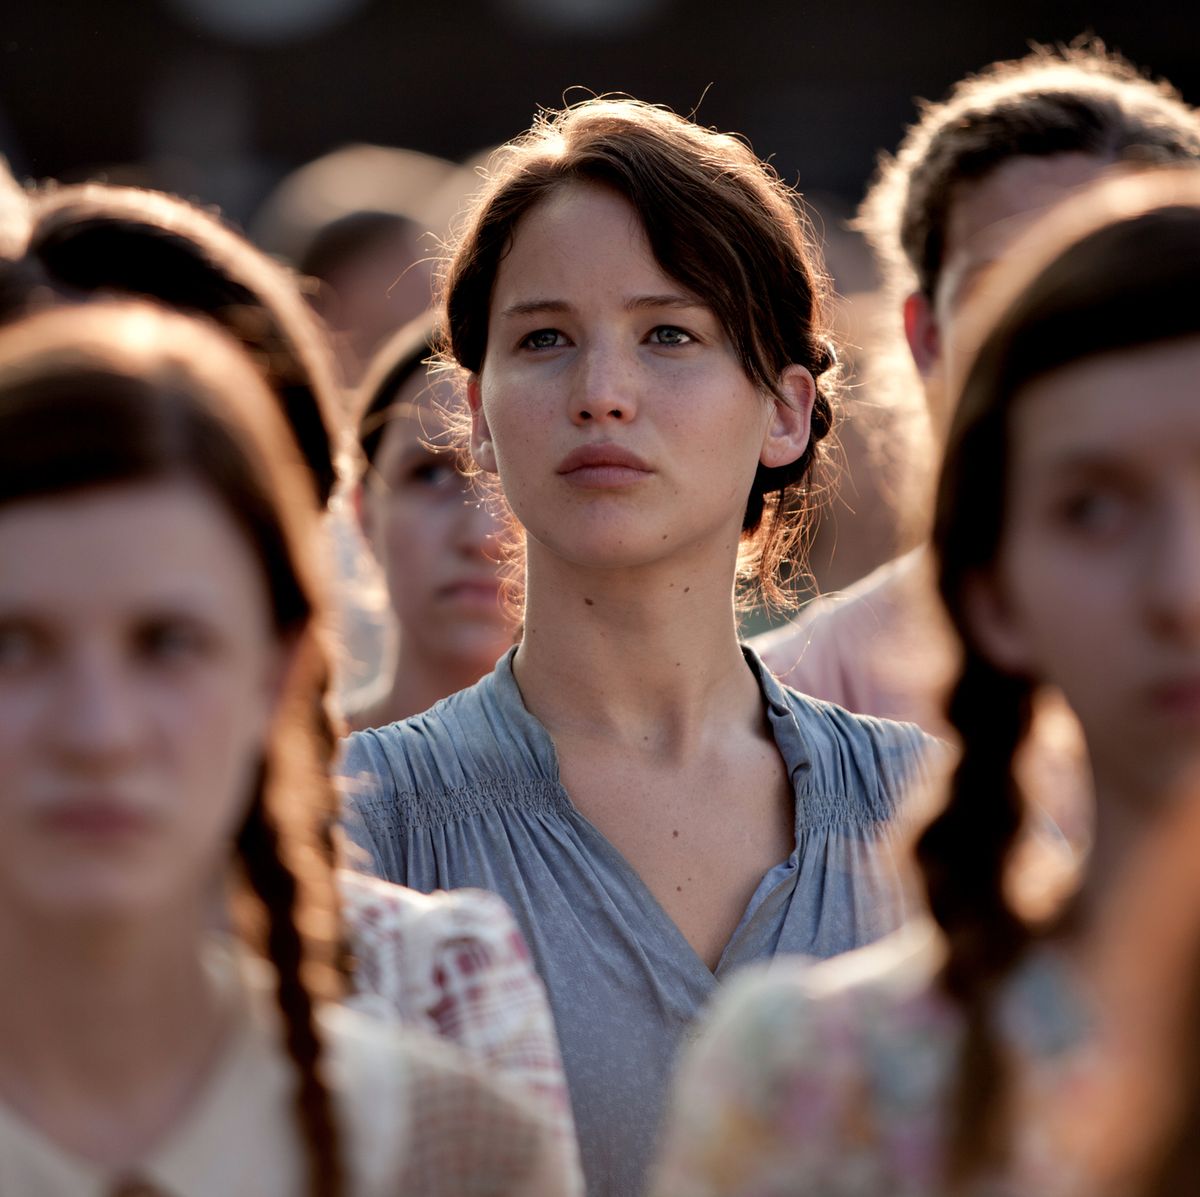 Where to watch The Hunger Games movies